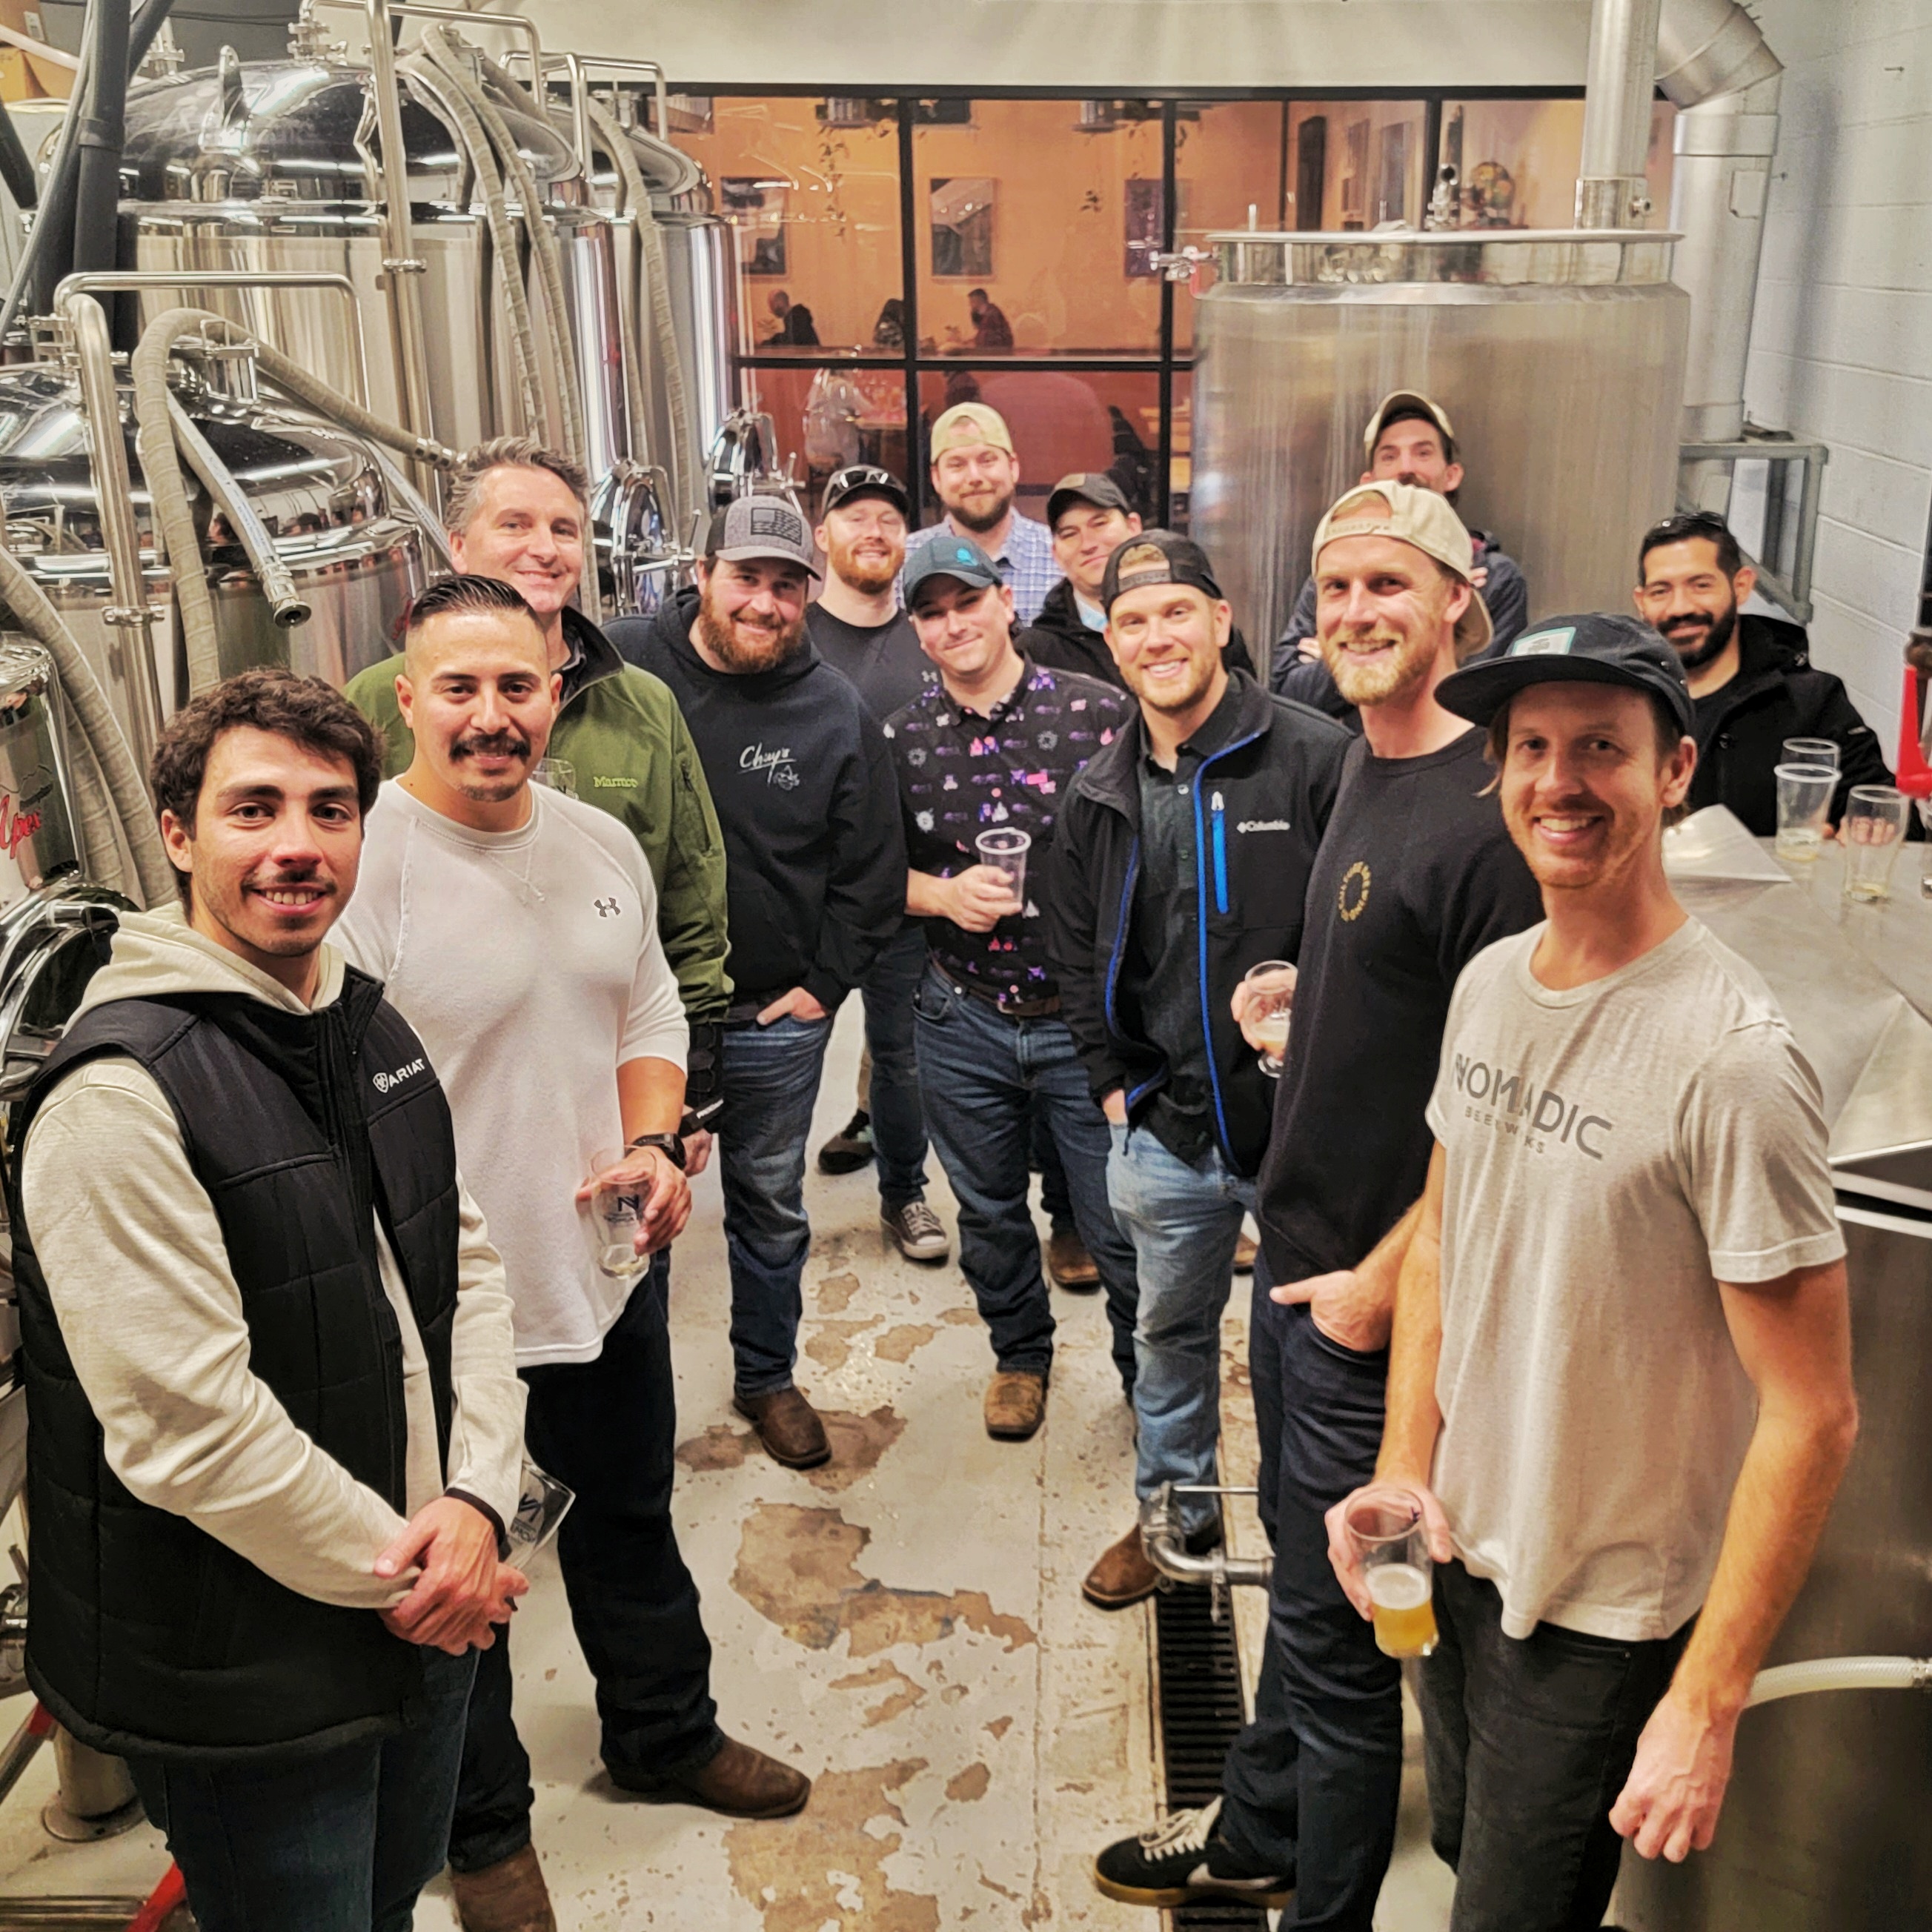 People being led on a brewhouse tour in a brewery